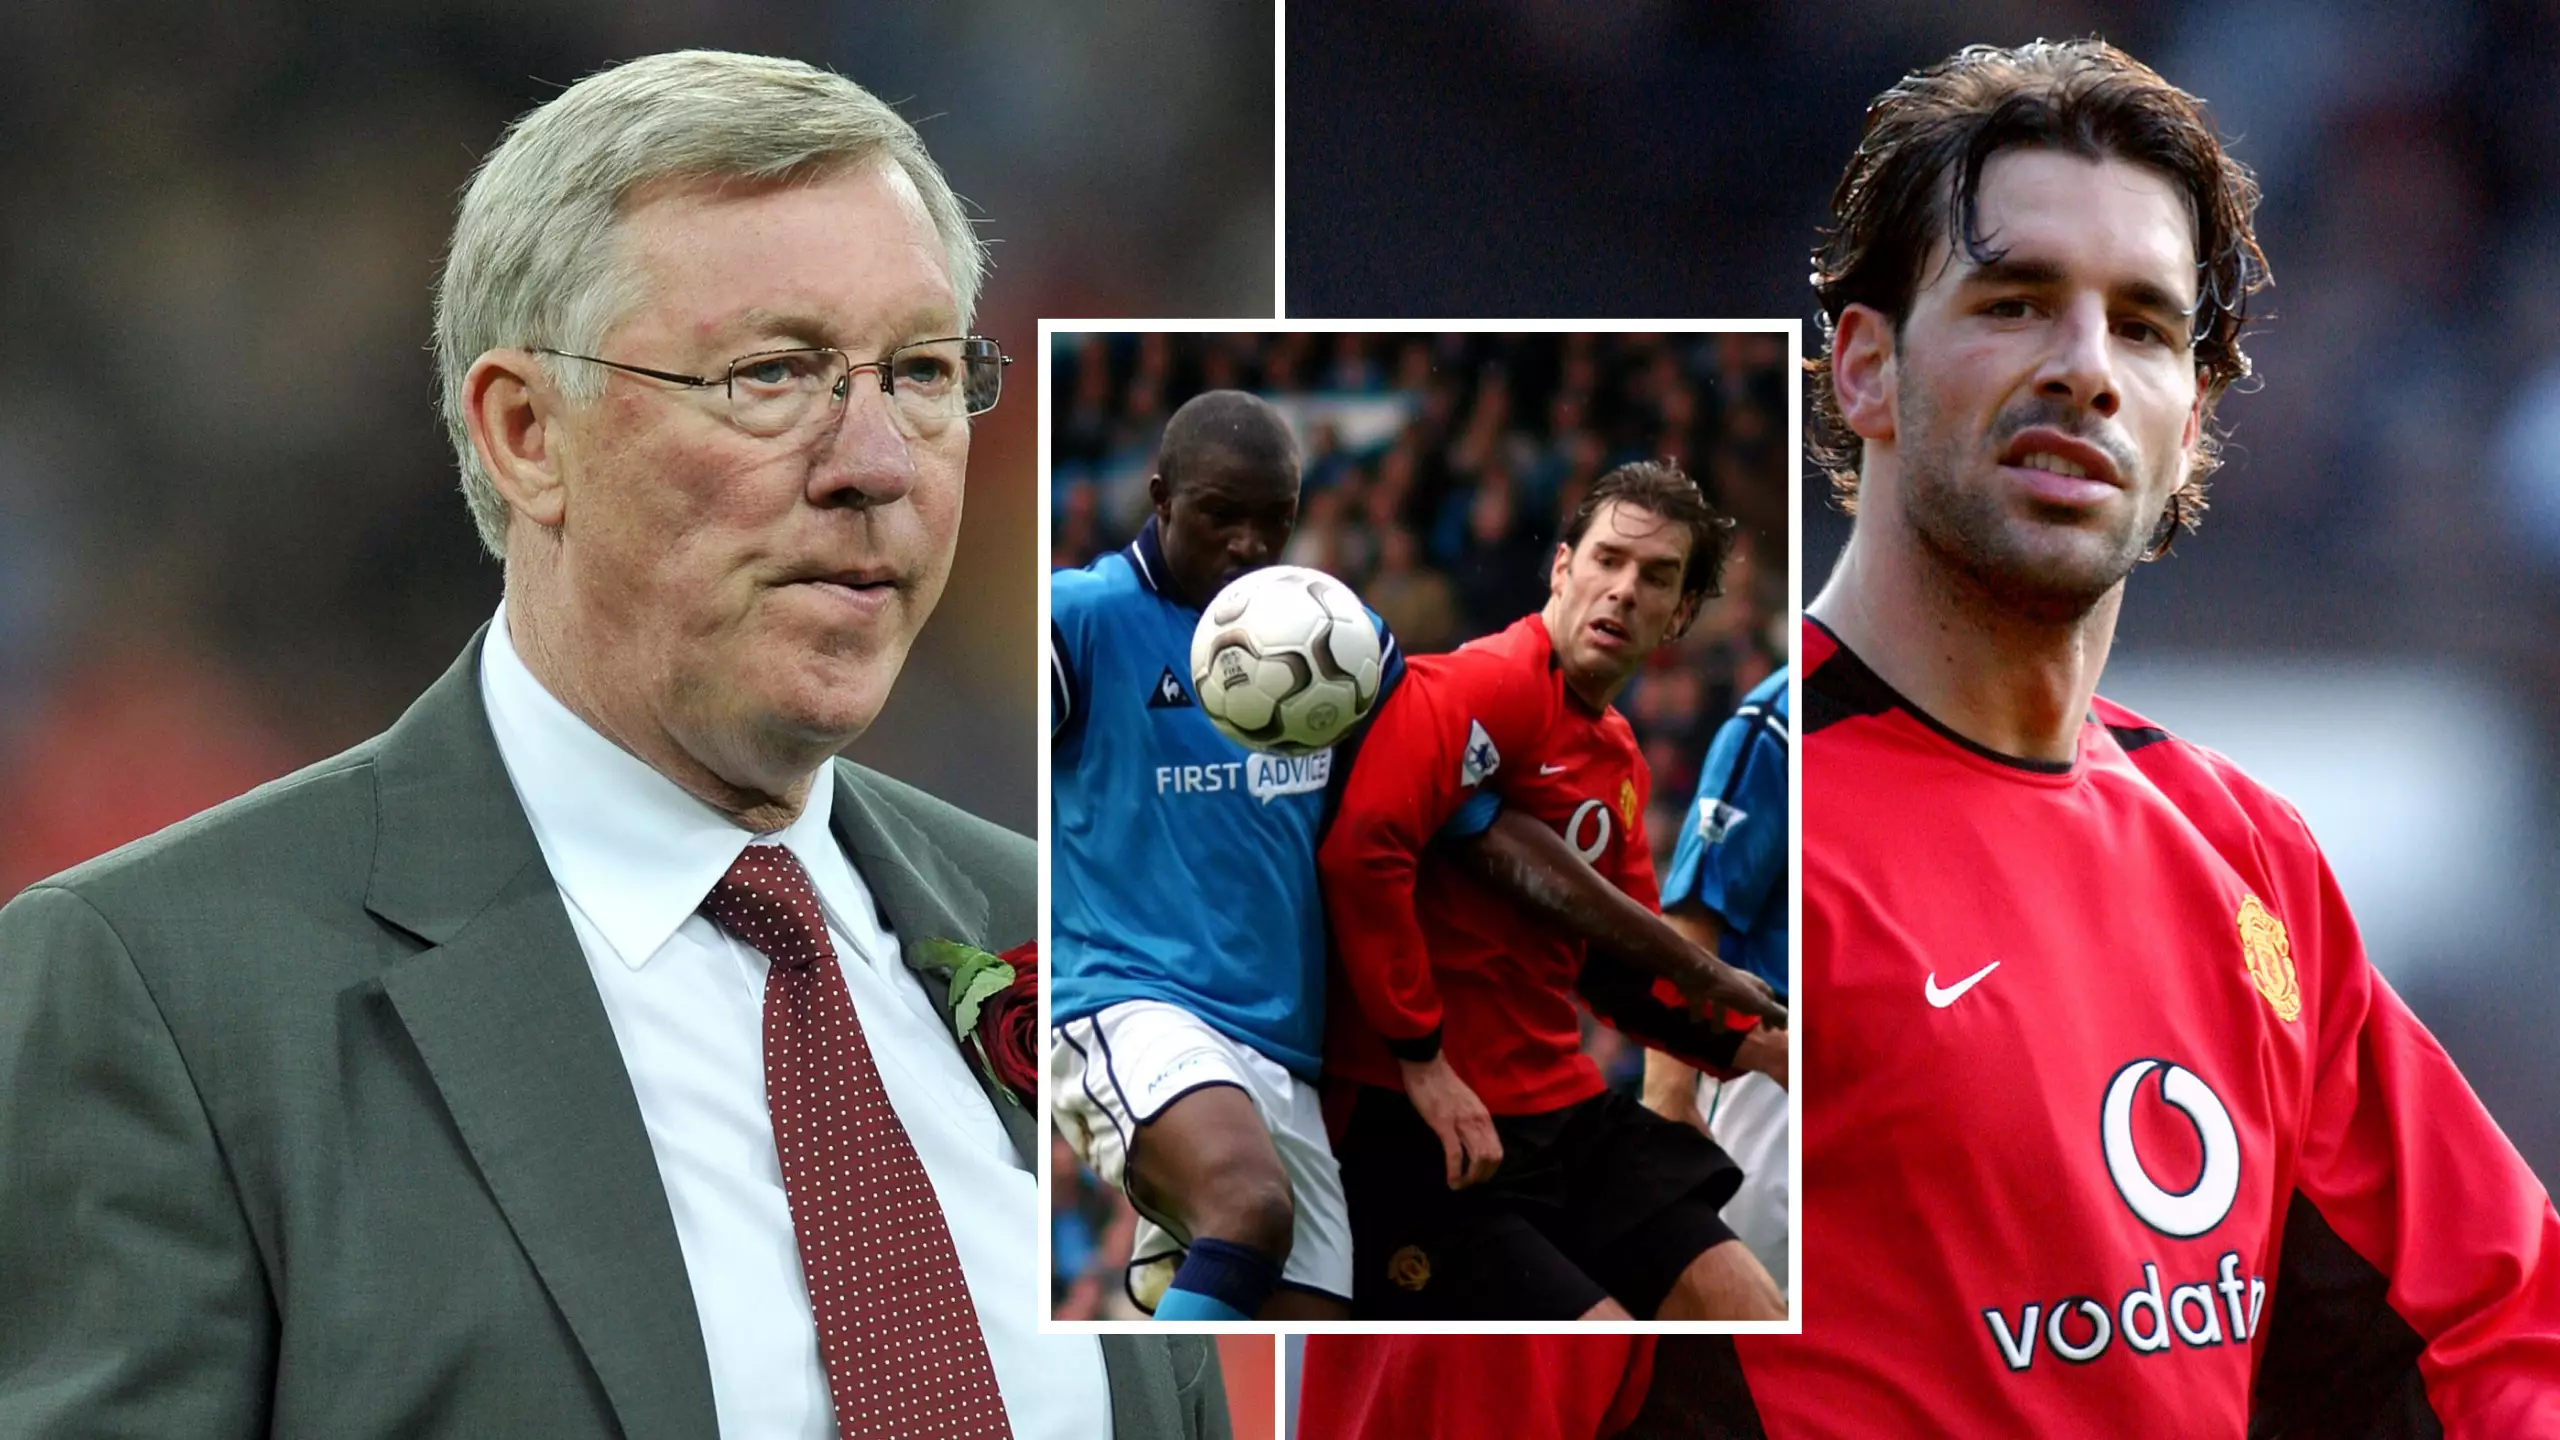 Sir Alex Ferguson Was Furious With Ruud Van Nistelrooy For Swapping Shirts With A Manchester City Player